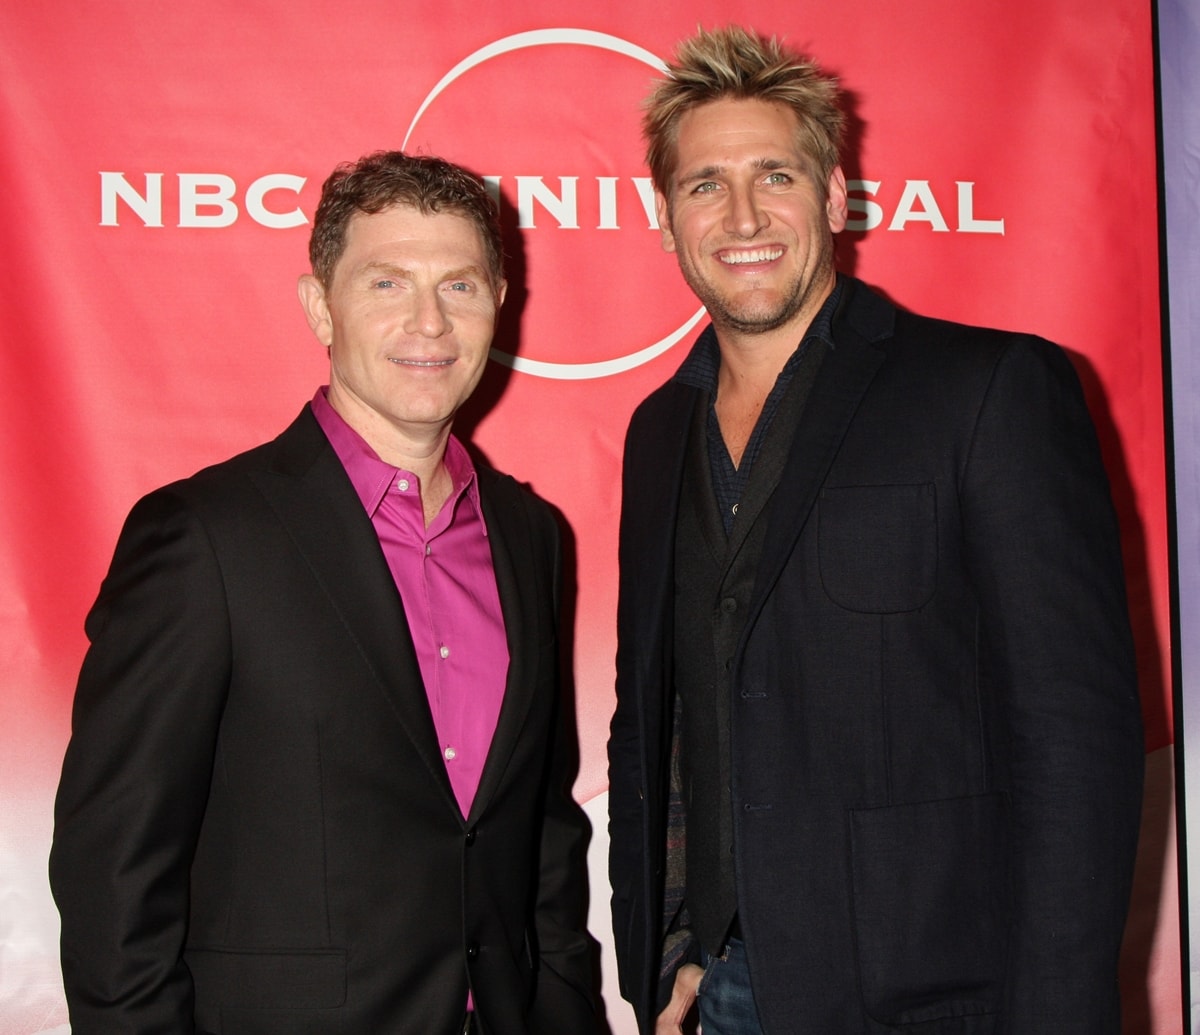 American celebrity chef Bobby Flay and Australian celebrity chef Curtis Travis Stone